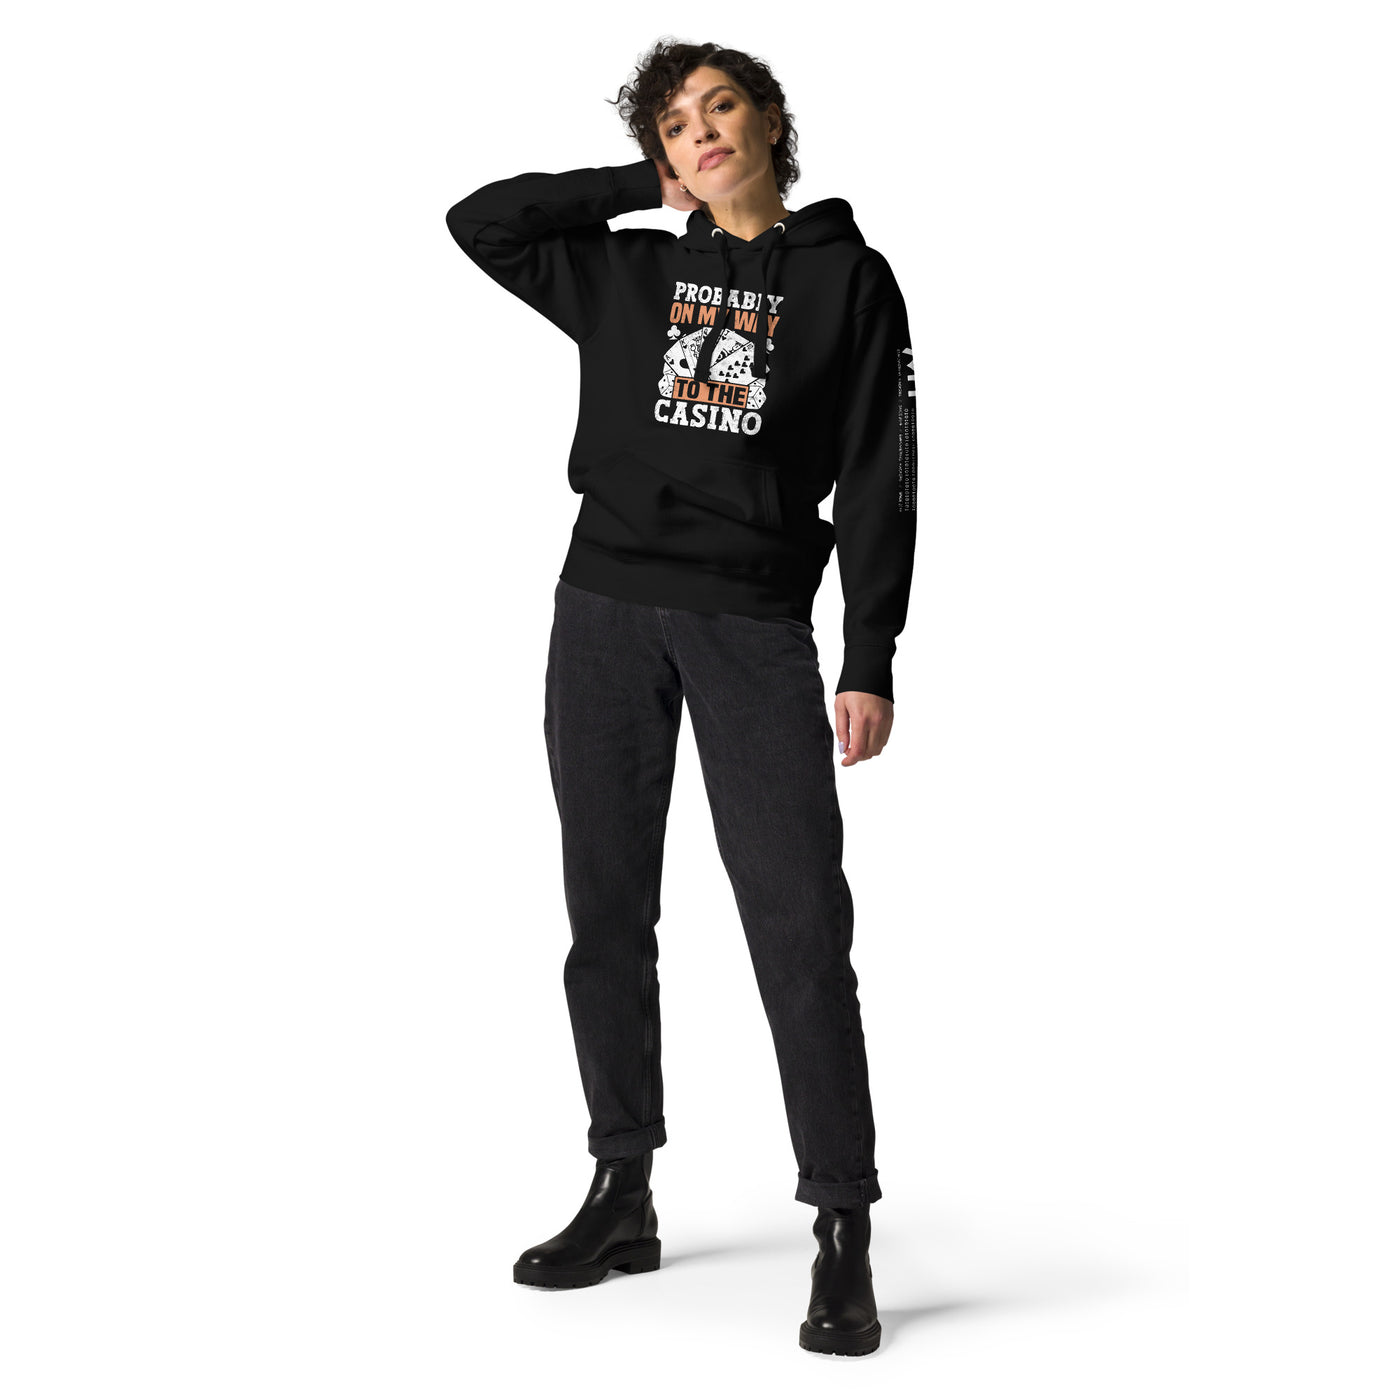 Probably, my way to the Casino - Unisex Hoodie